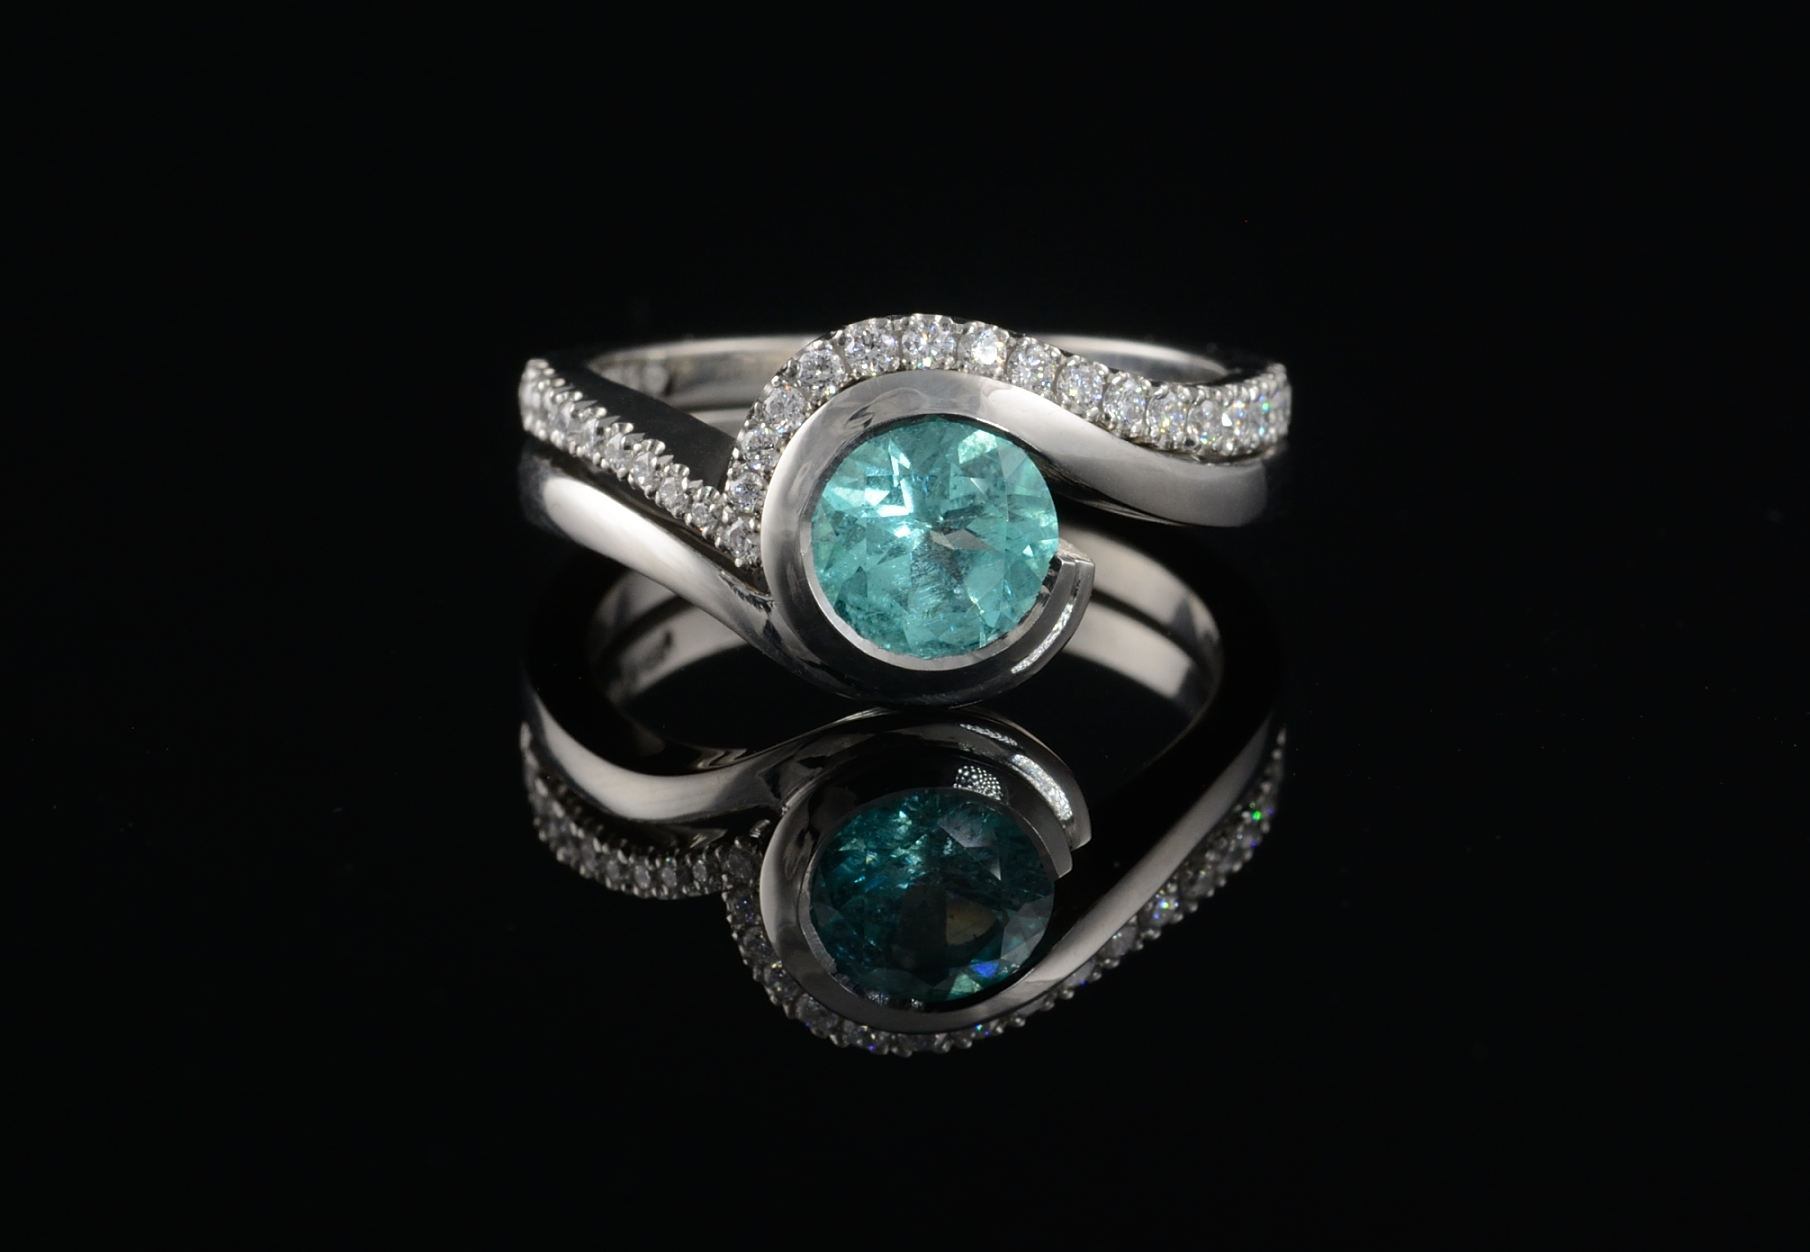 Platinum 'Wave' engagement and wedding ring set with pariaba tourmaline and diamonds